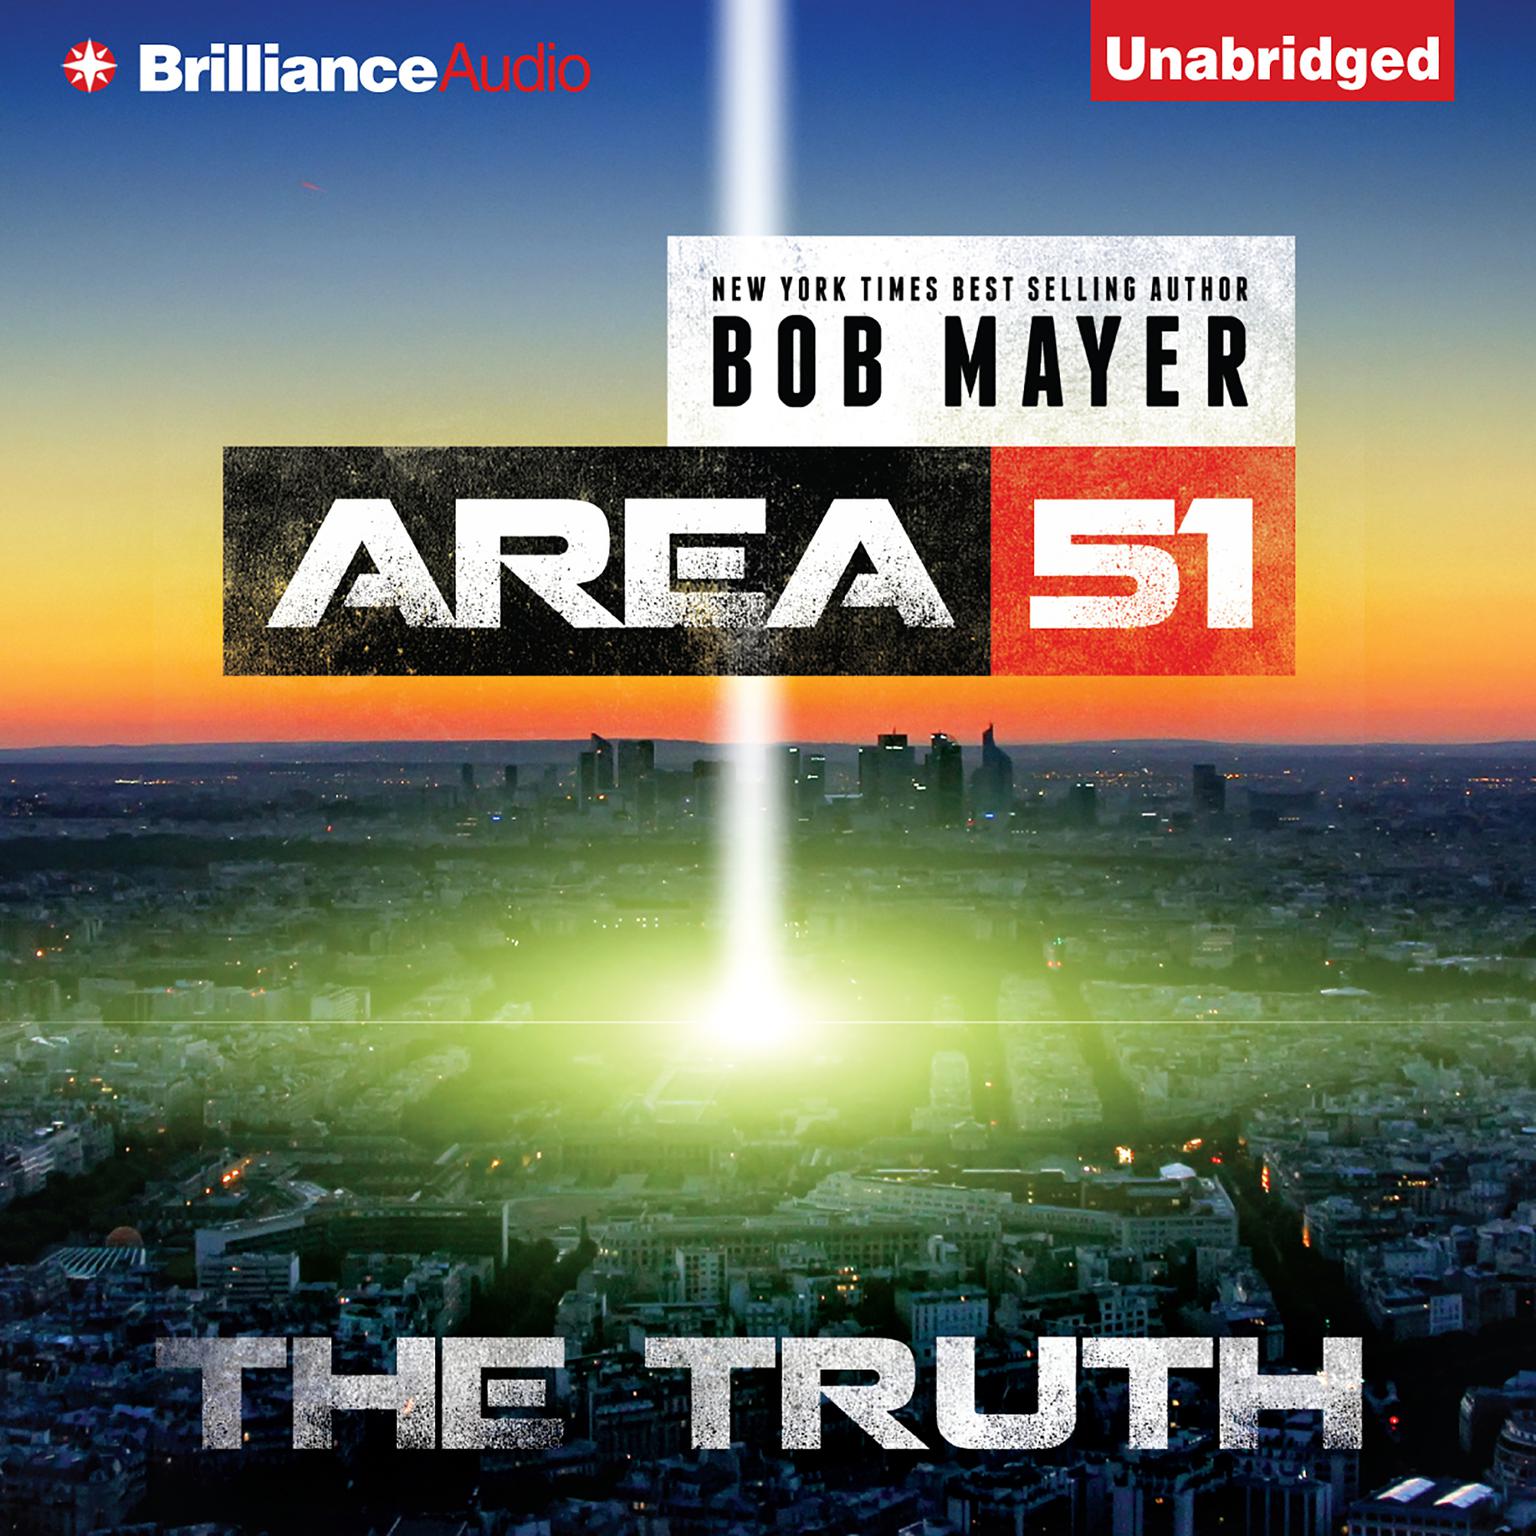 The Truth Audiobook, by Bob Mayer